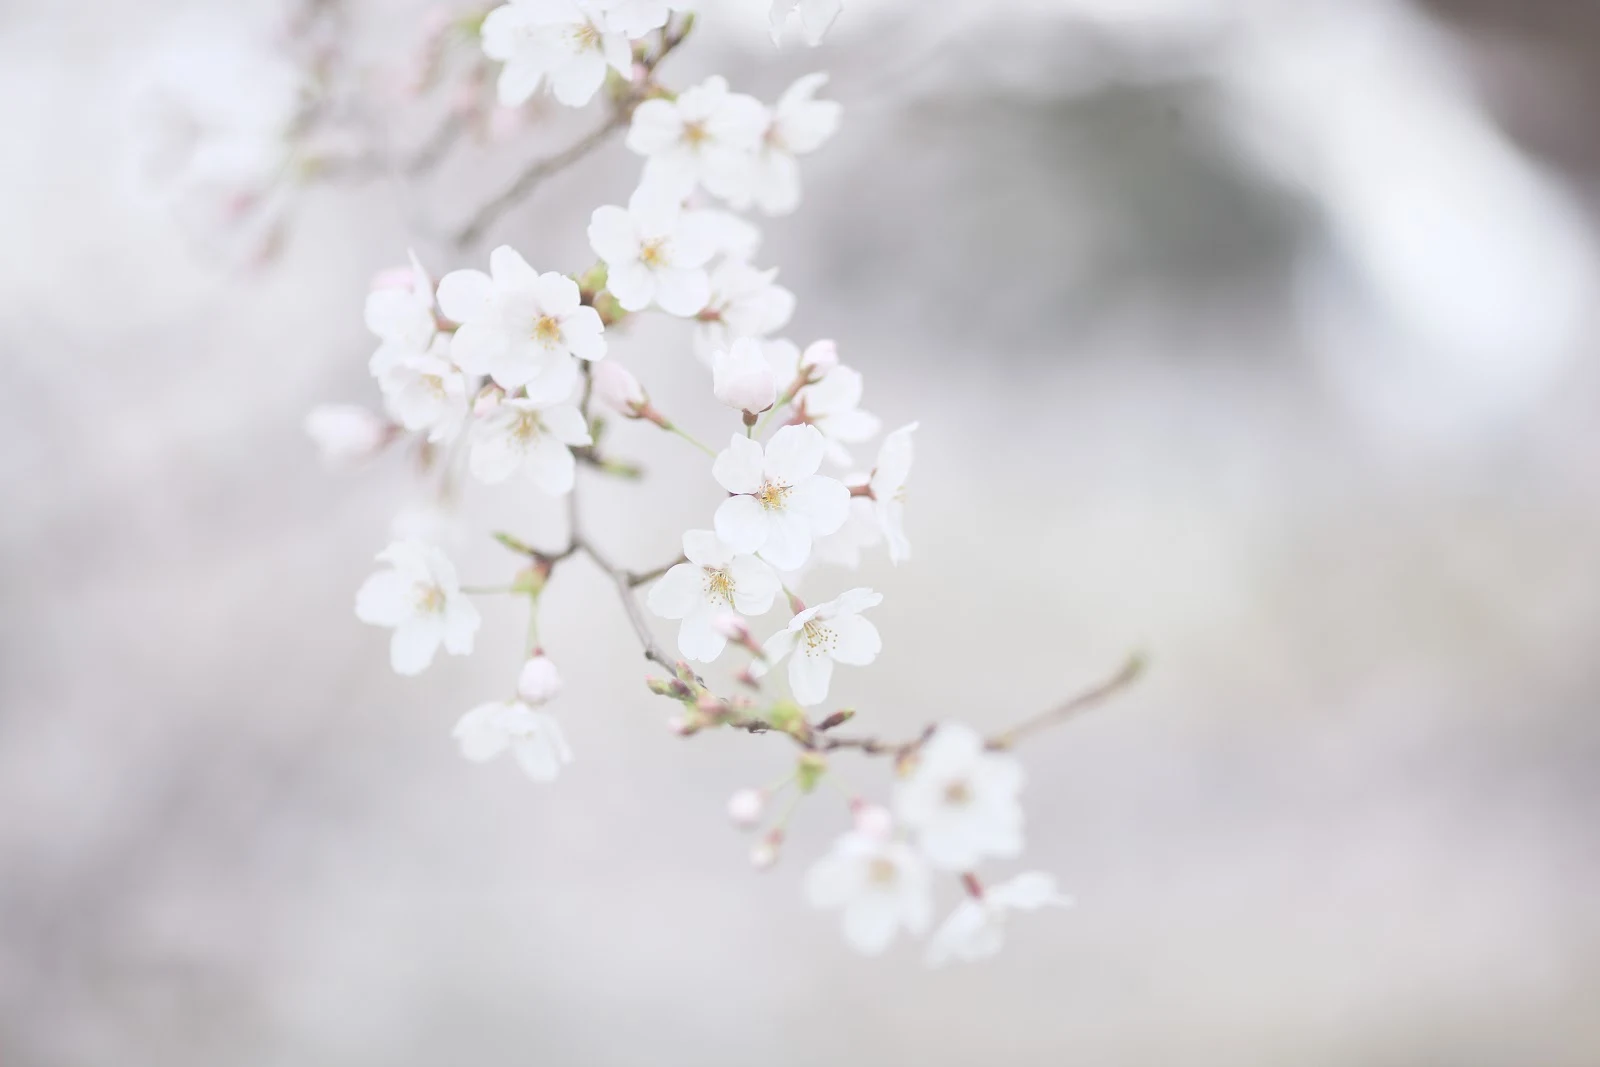 A Stunning Flowers, Cherry Blossom, Pastel, Depth Of Field, Closeup 5K Desktop and Mobile Wallpaper Background (5616x3744)